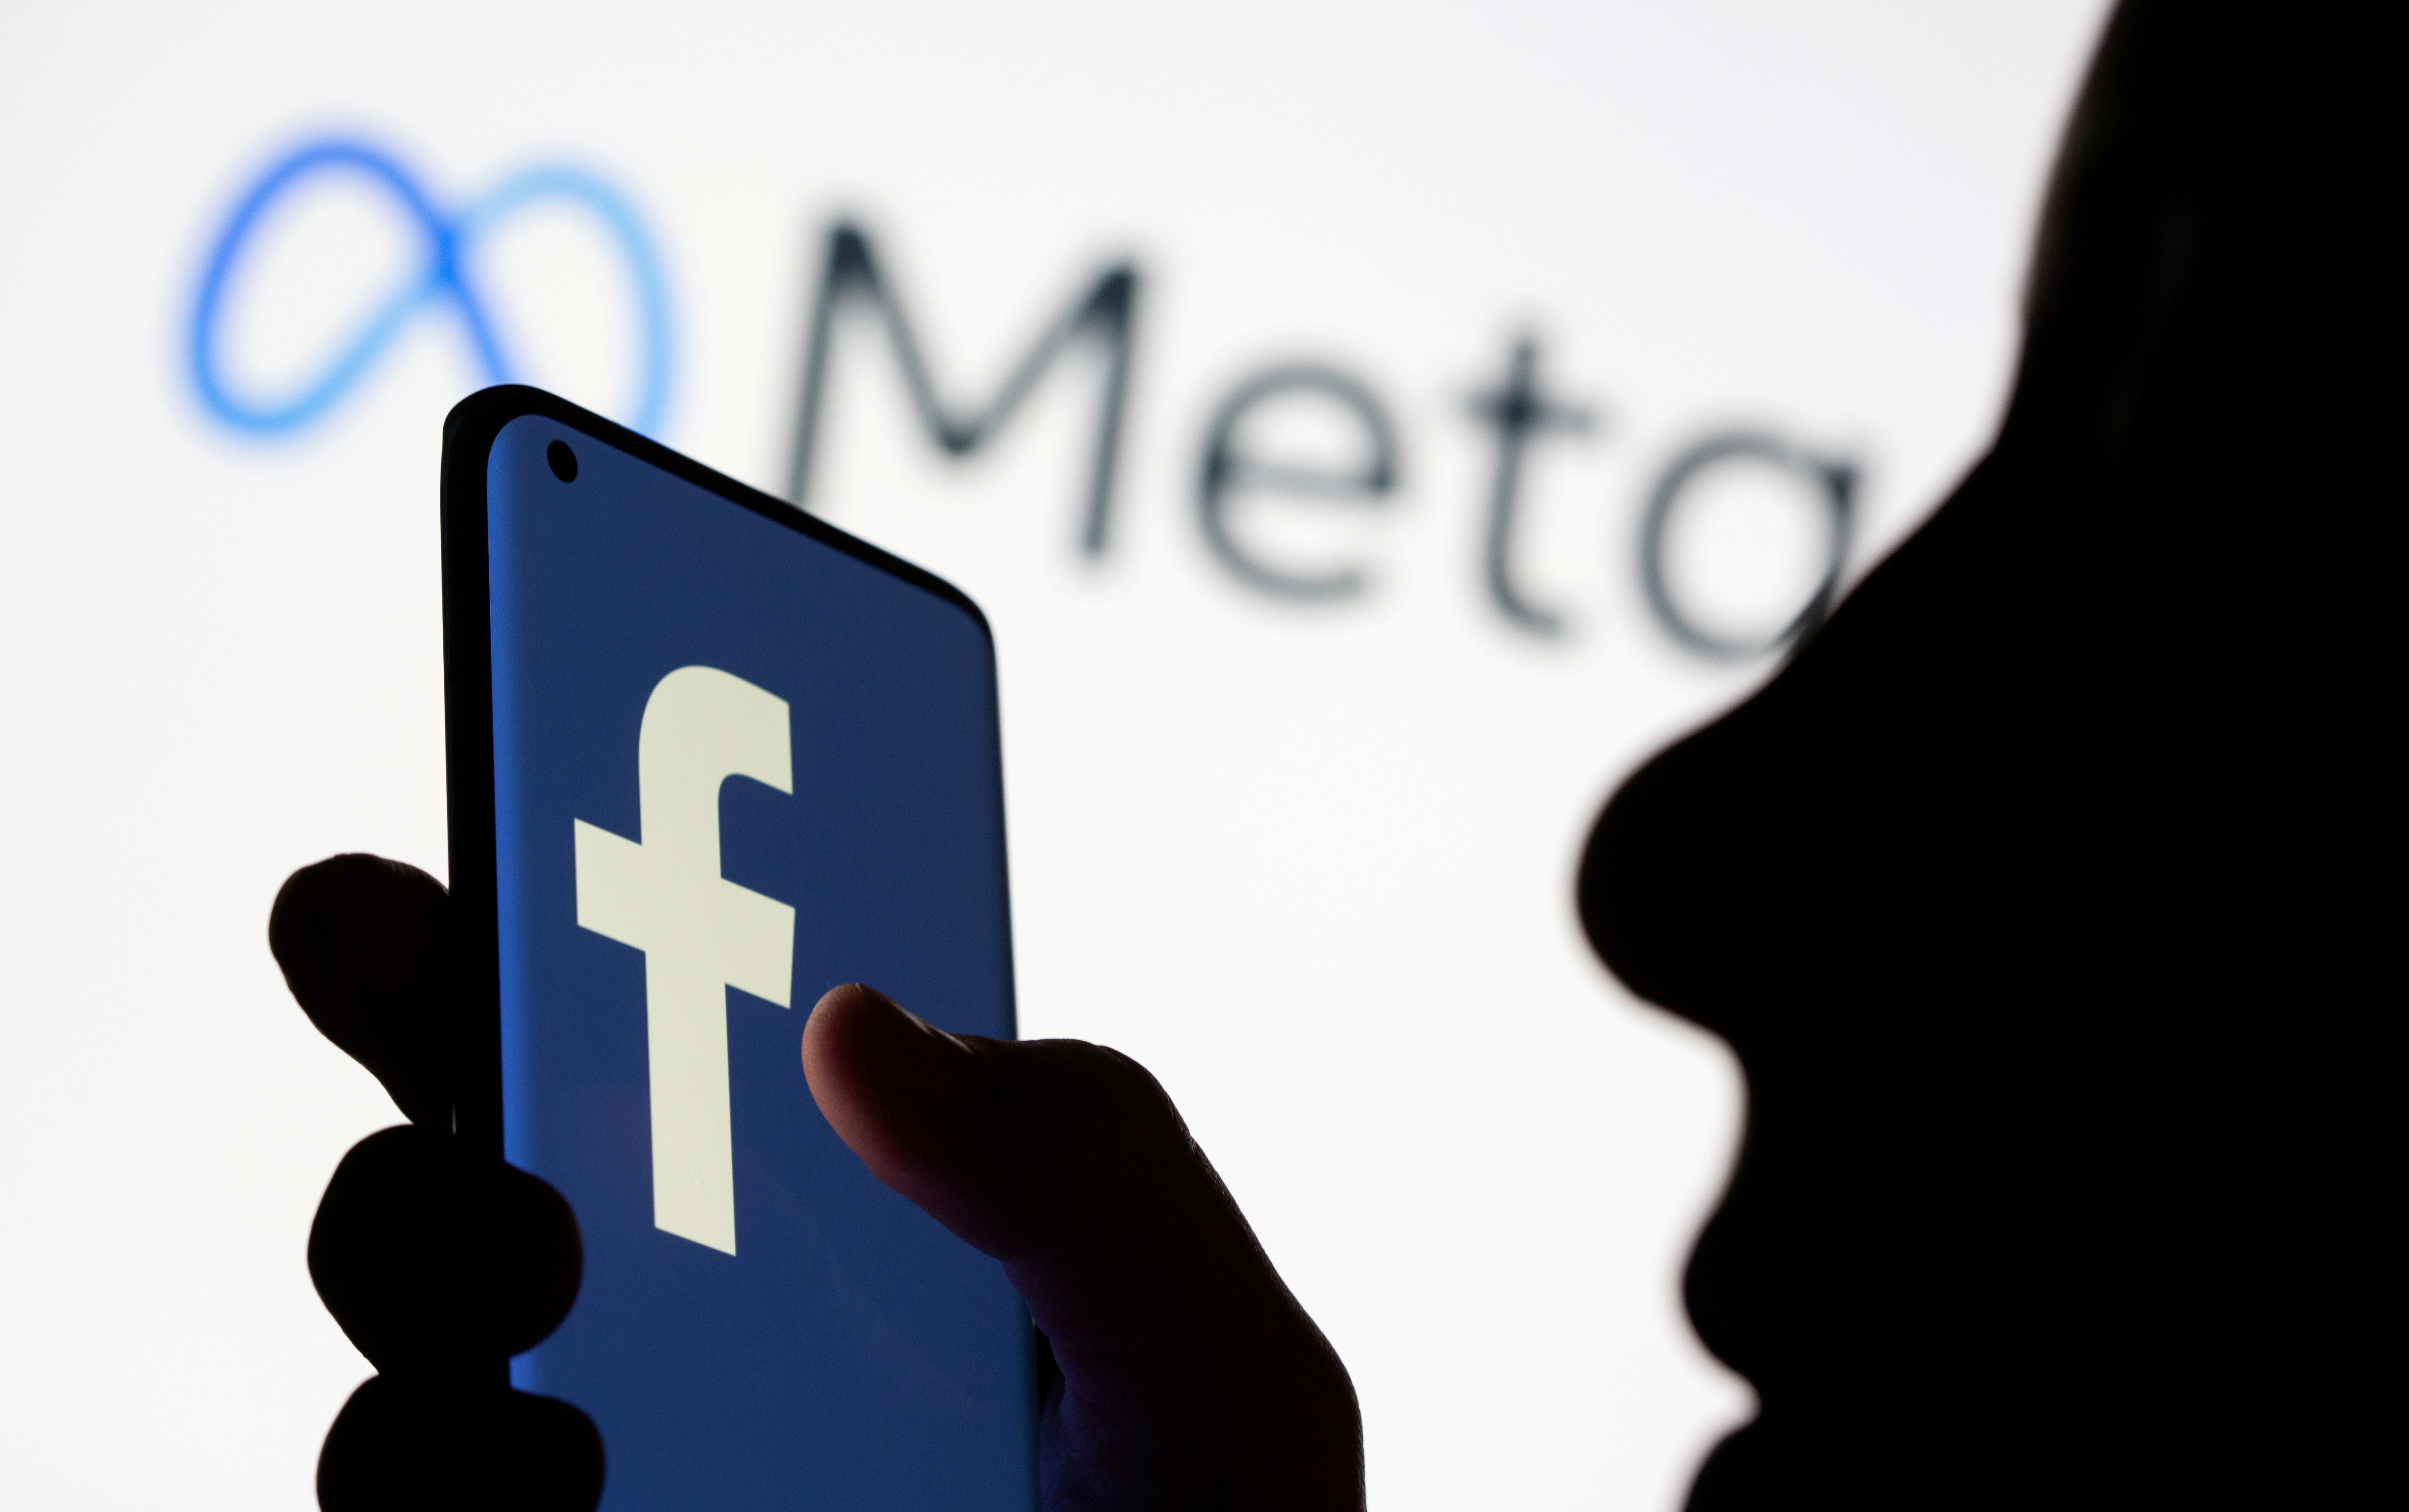 Woman holds smartphone with Facebook logo in front of  Facebook's new rebrand logo Meta in this illustration picture taken October 28, 2021. REUTERS/Dado Ruvic